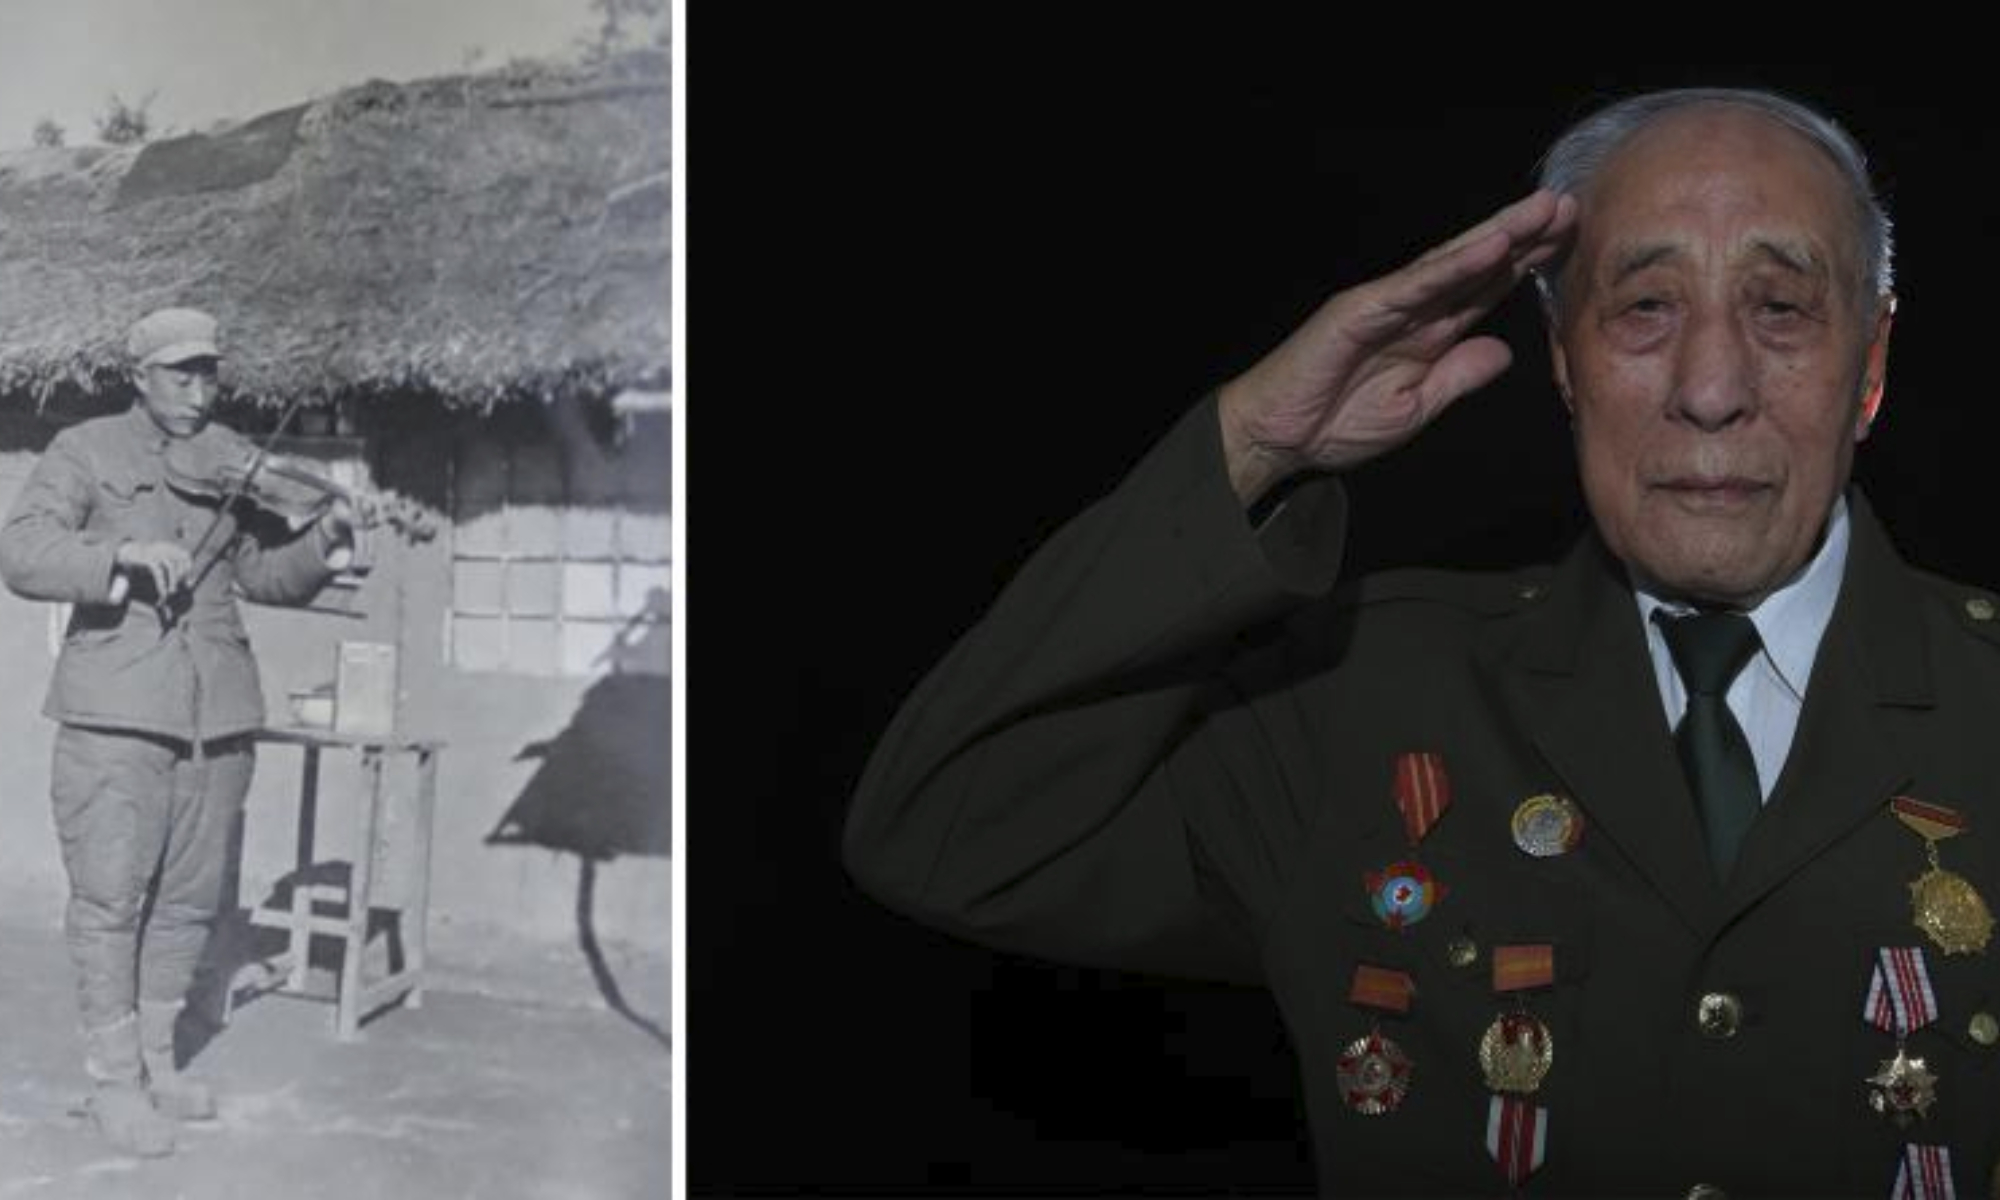 This combo photo shows the portrait of Cheng Maoyou on July 18, 2020. Born in 1930, Cheng participated in the War to Resist U.S. Aggression and Aid Korea in 1952.

Seventy-three years ago, the Chinese People's Volunteers (CPV) crossed the Yalu River and fought alongside the army of the Democratic People's Republic of Korea, eventually winning the War to Resist U.S. Aggression and Aid Korea in 1953.

Thursday marked the 70th anniversary of the victory of the War.

Photographers from Xinhua took portrait photos of some CPV veterans. (Xinhua/Yang Qing)